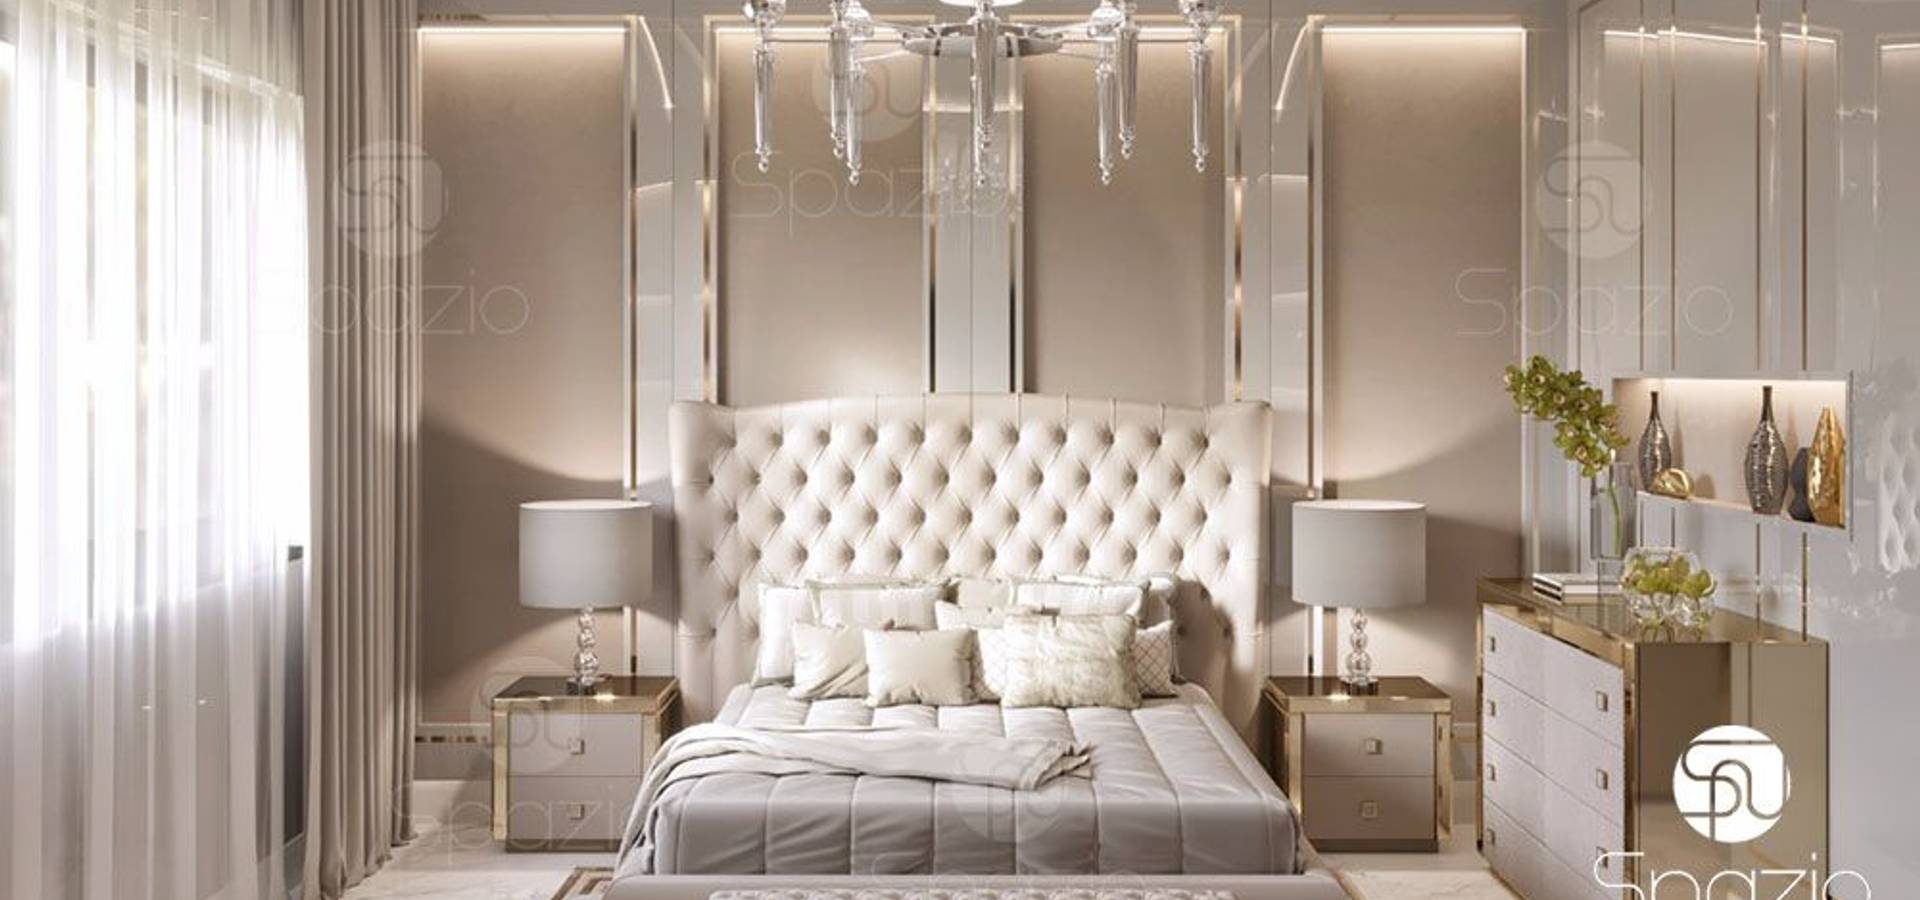 Bedroom Interior Designs For Couple In Luxury Modern Style